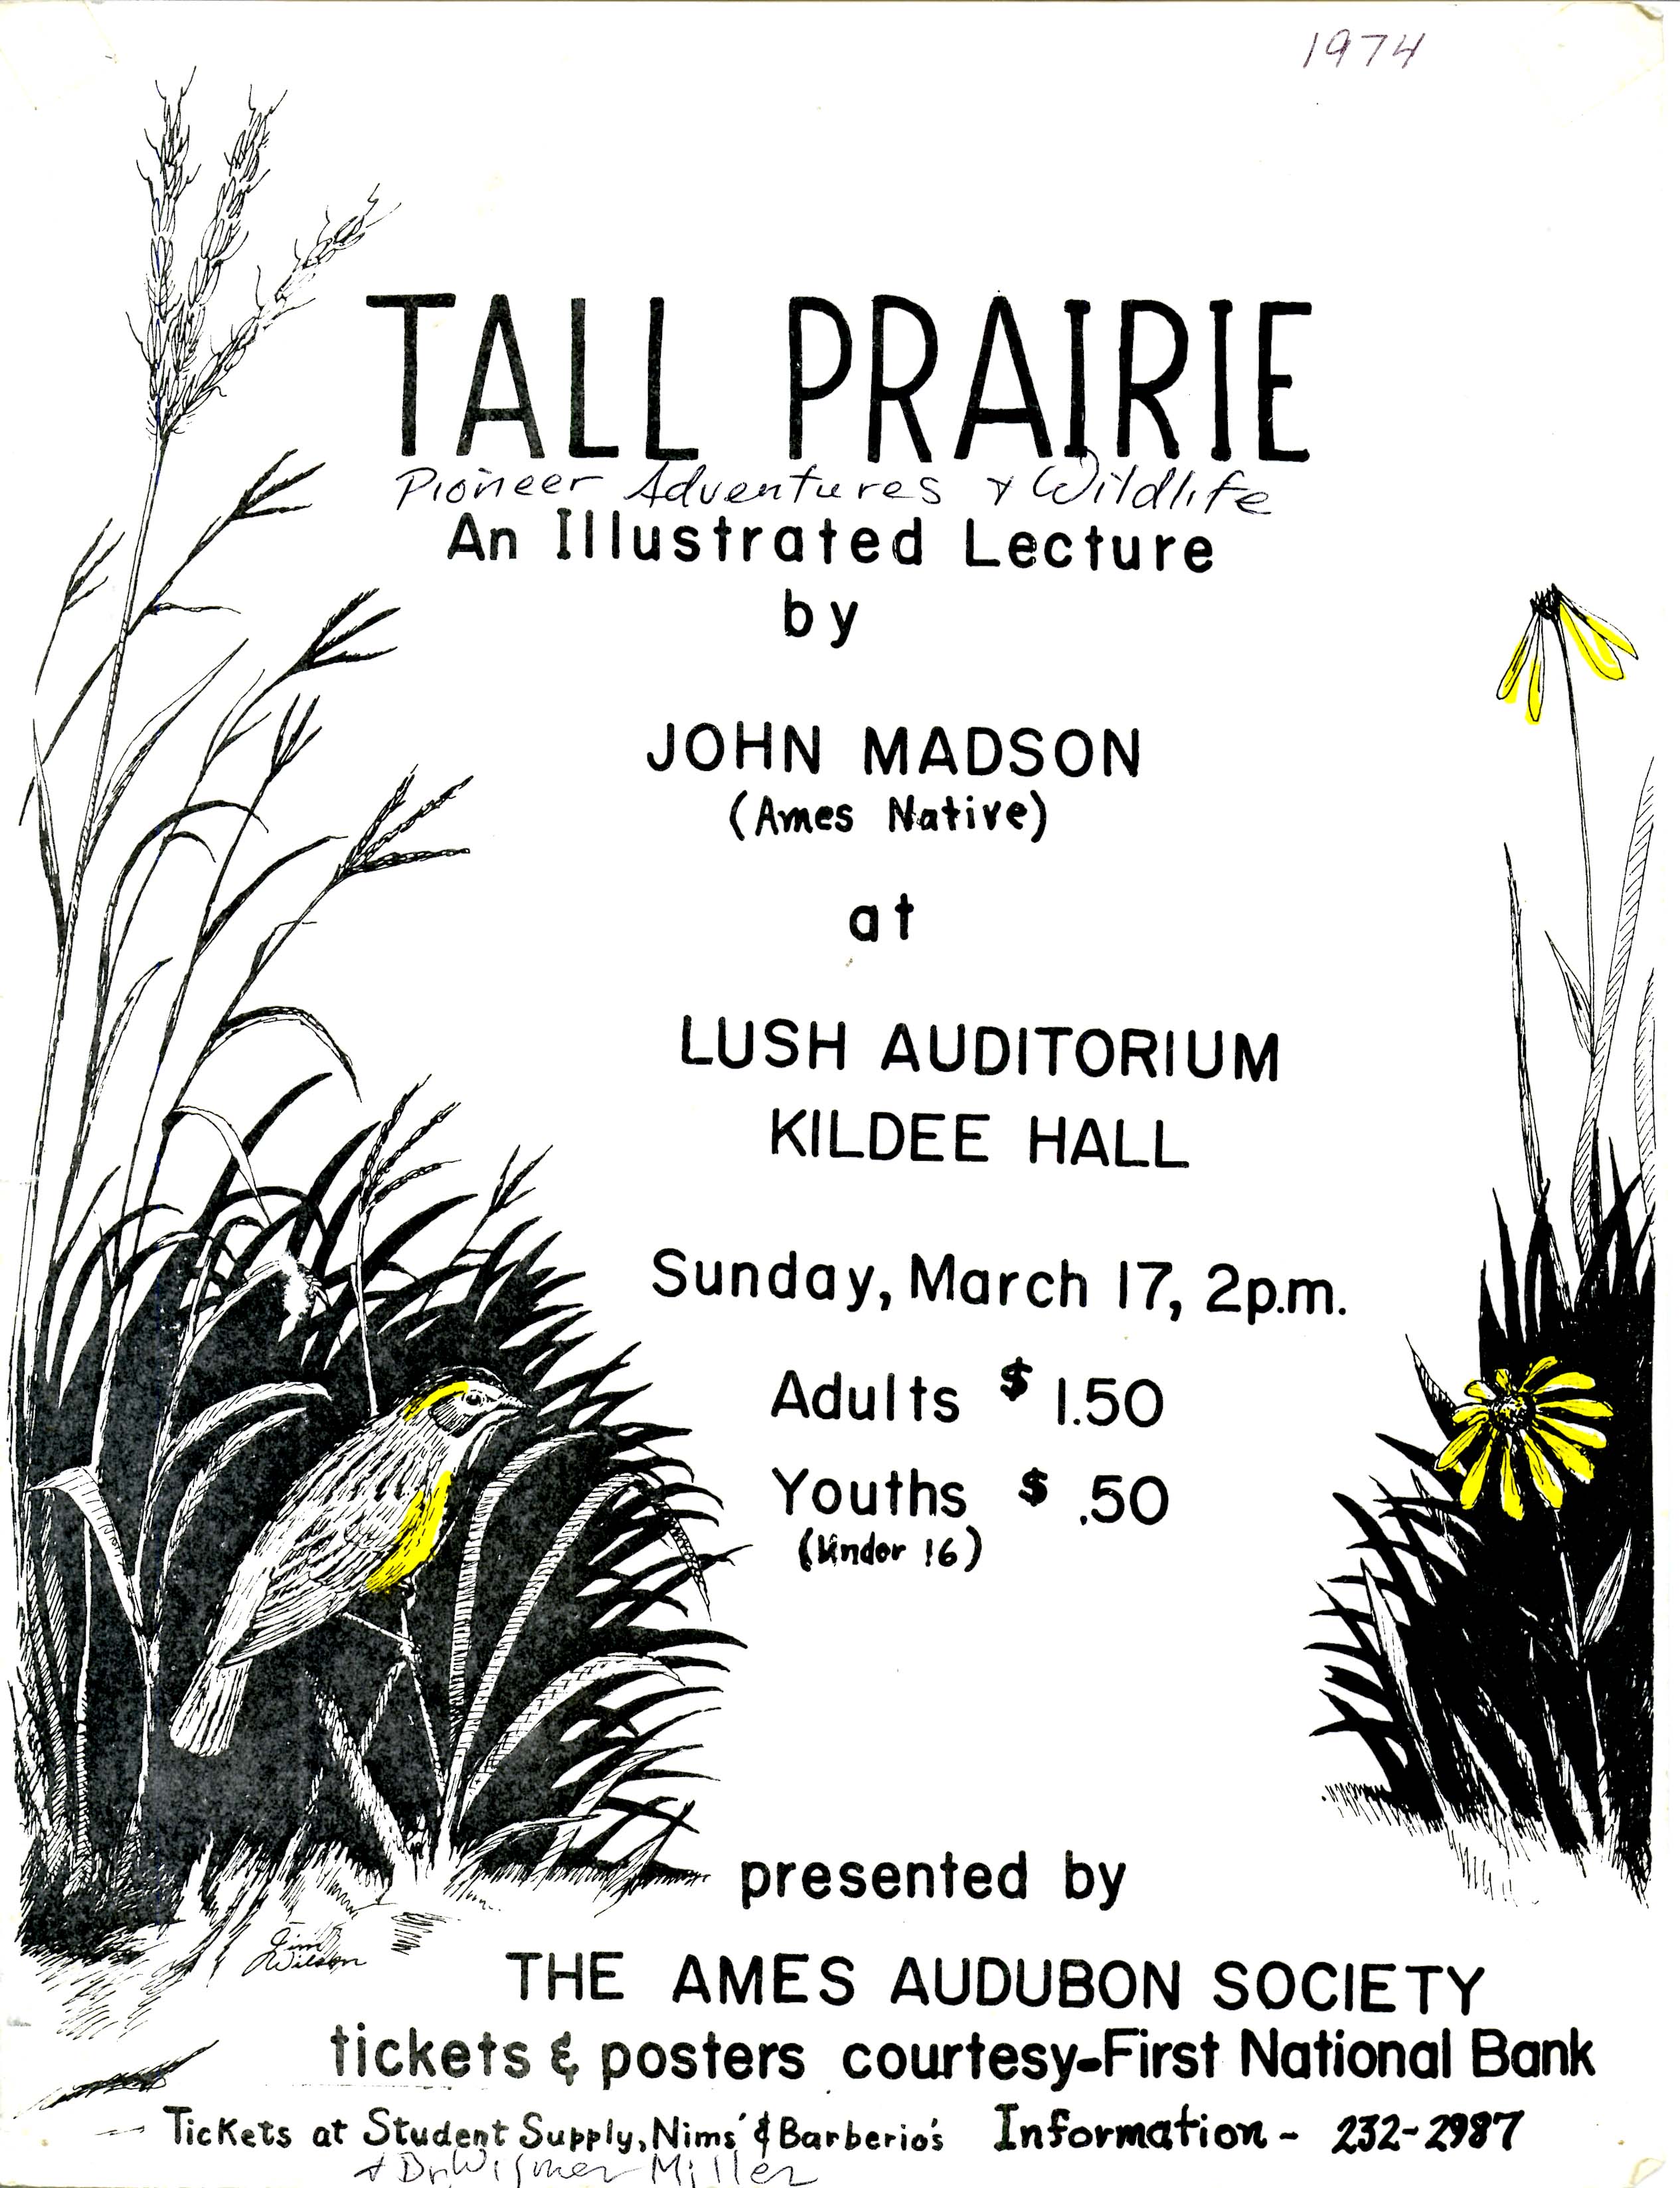 Tall Prairie: an illustrated lecture by John Madson flyer